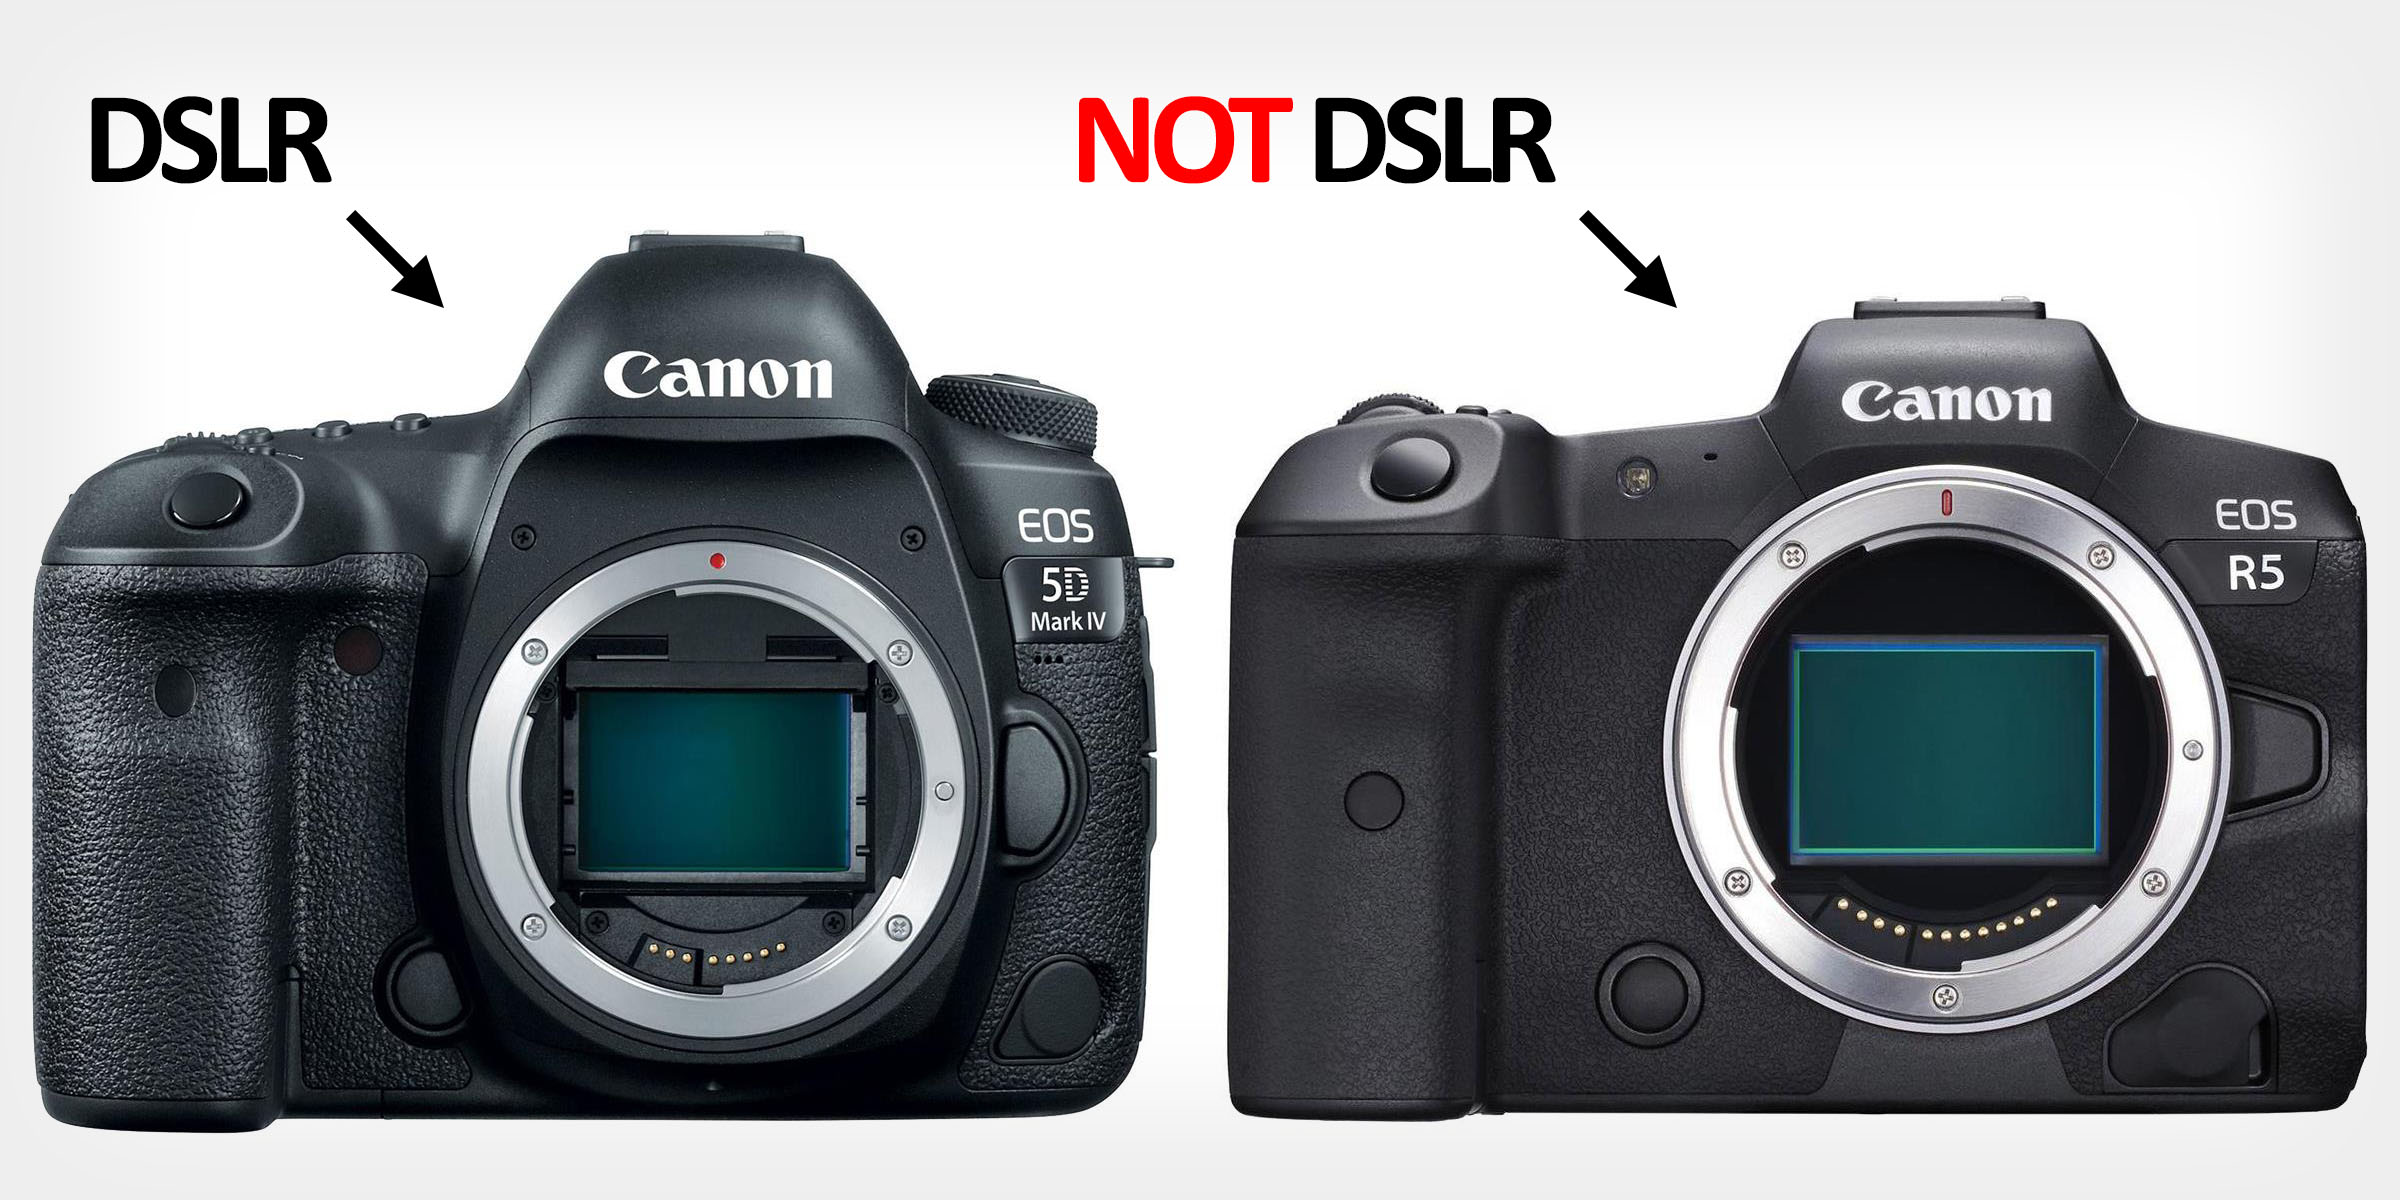 DSLR cameras: Everything you need to know